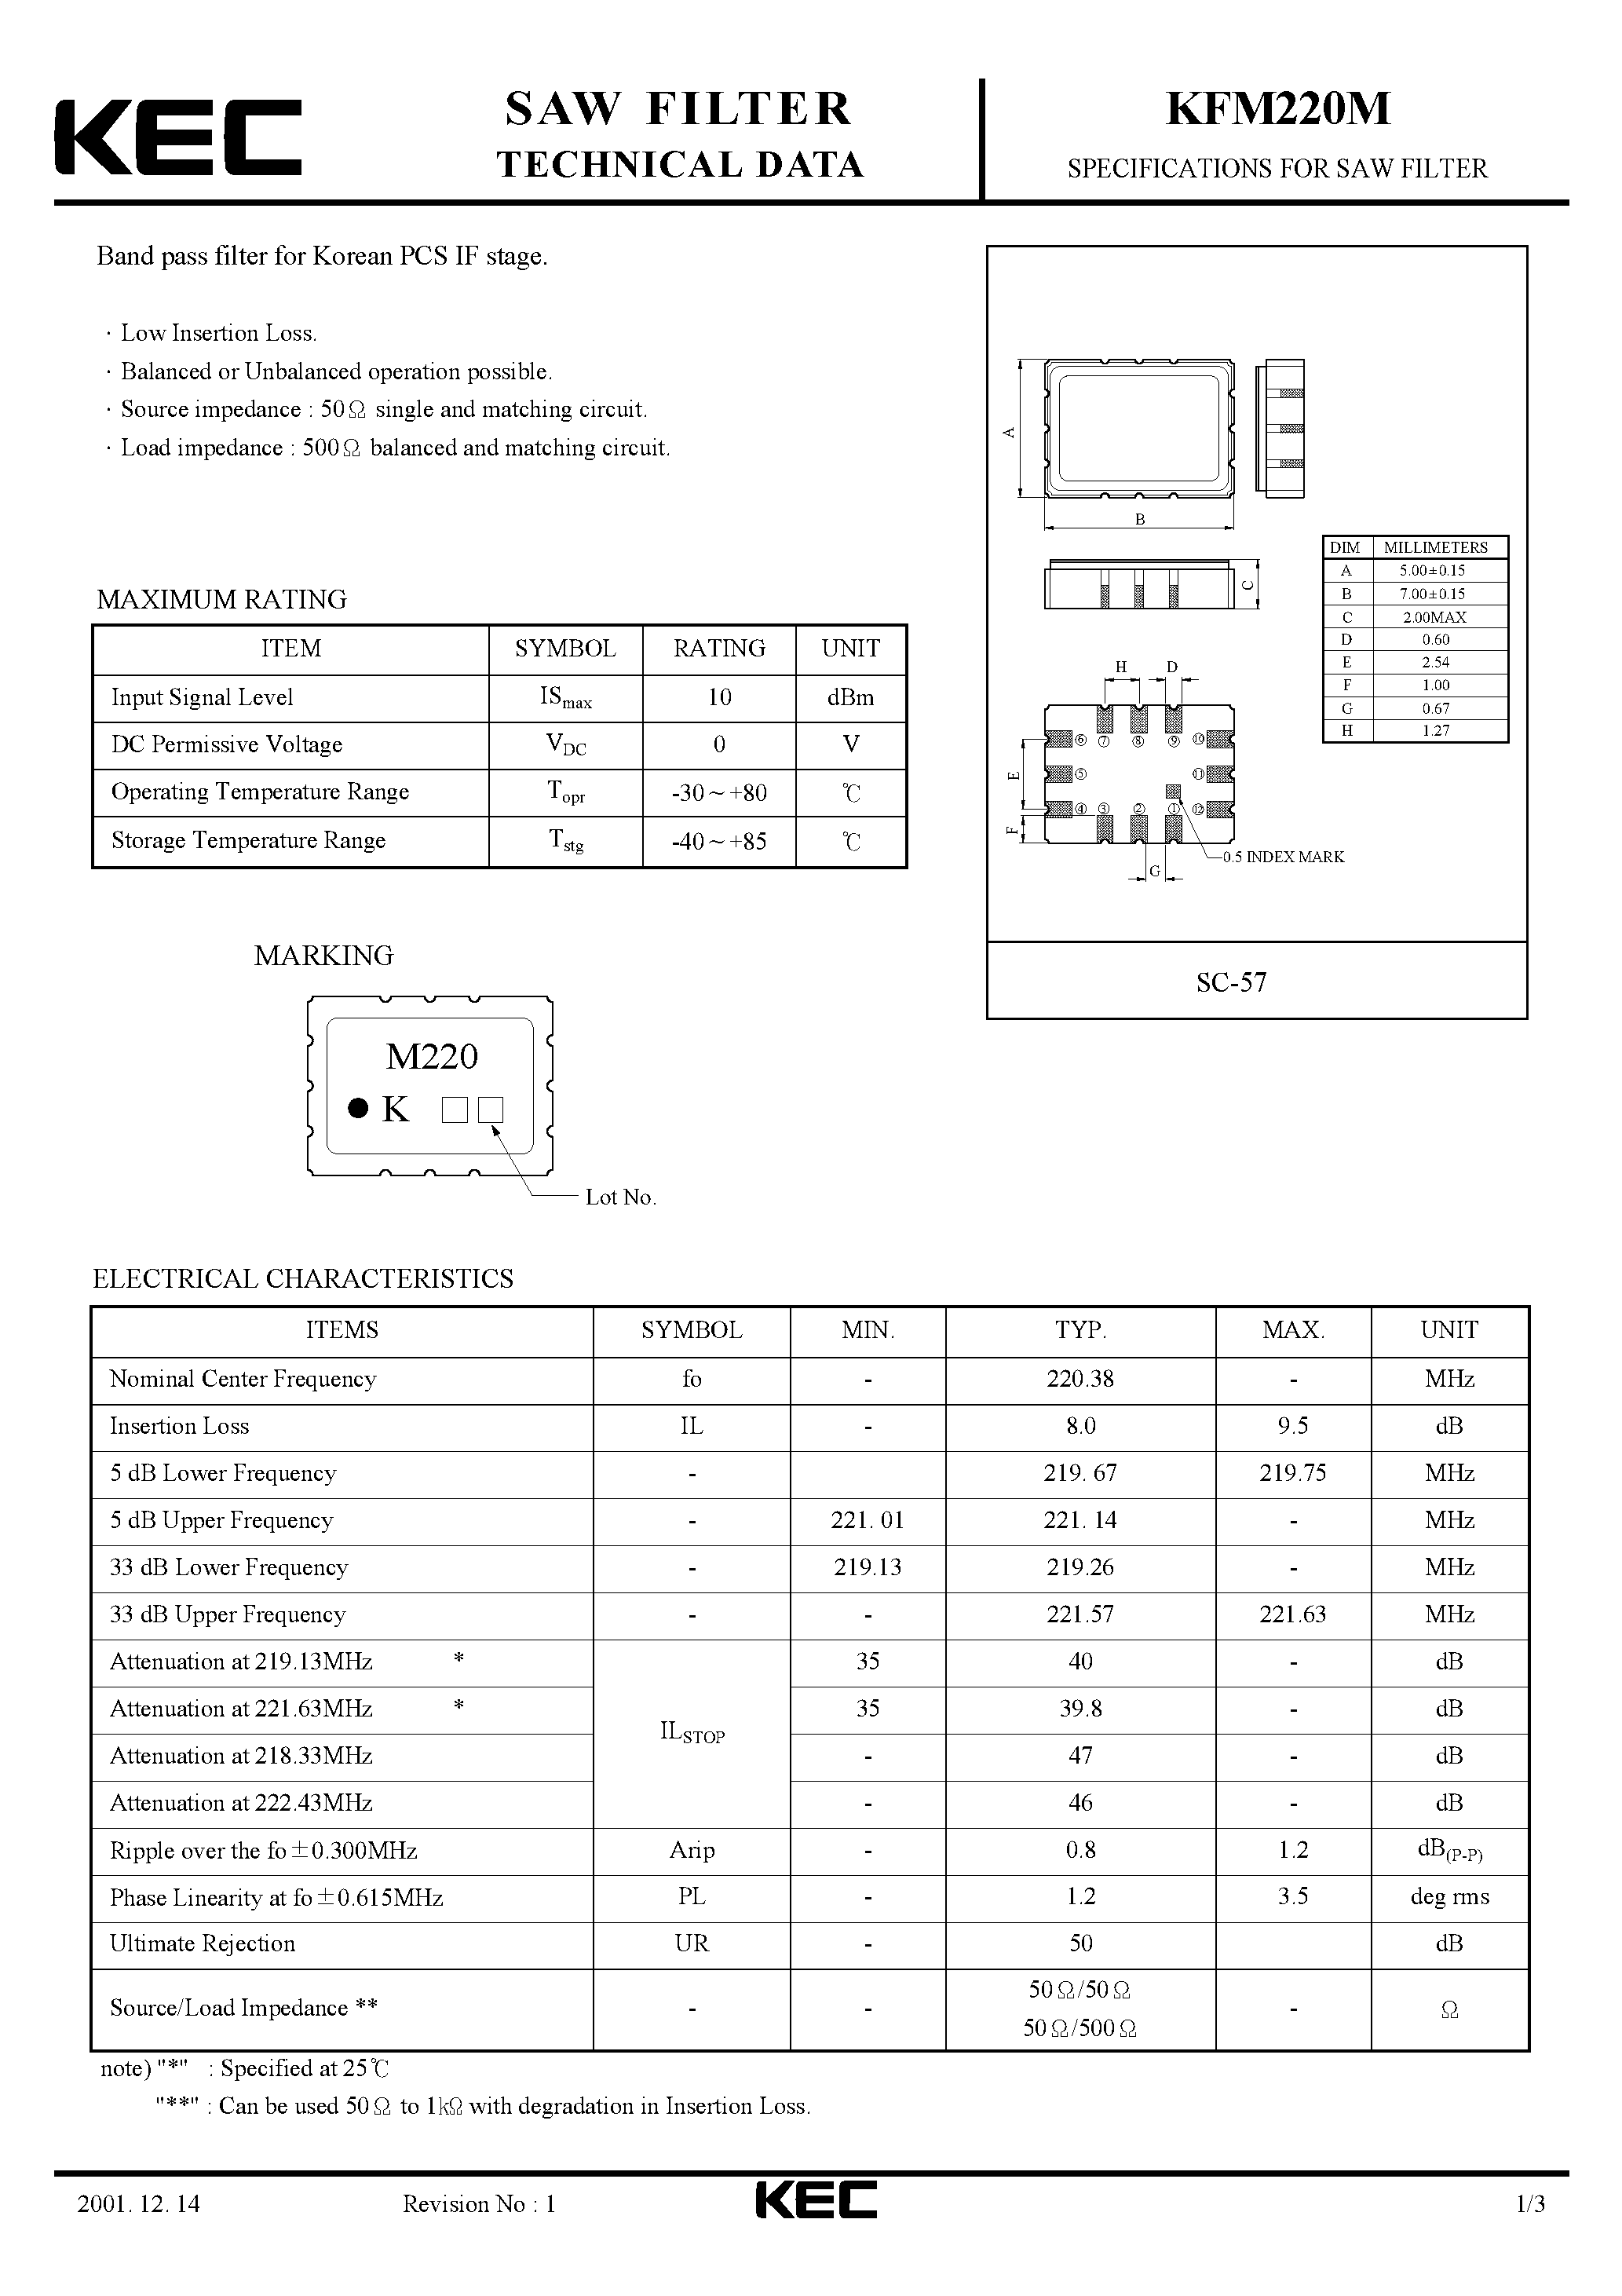 Даташит KFM220M-SPECIFICATIONS FOR SAW FILTER(BAND PASS FILTERS FOR KOREAN PCS IF STAGE) страница 1